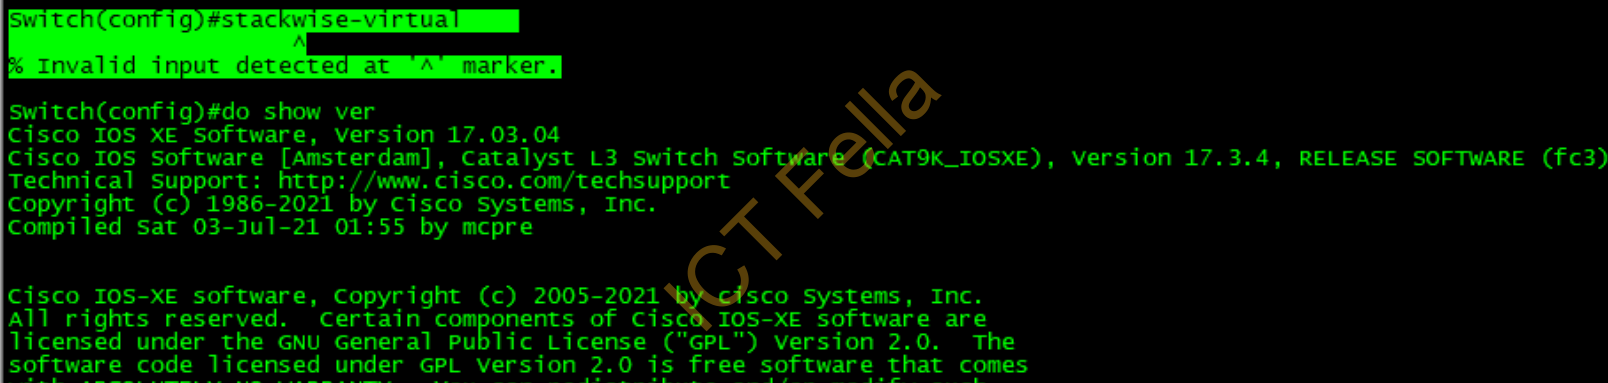 cisco crypto invalid input detected at marker